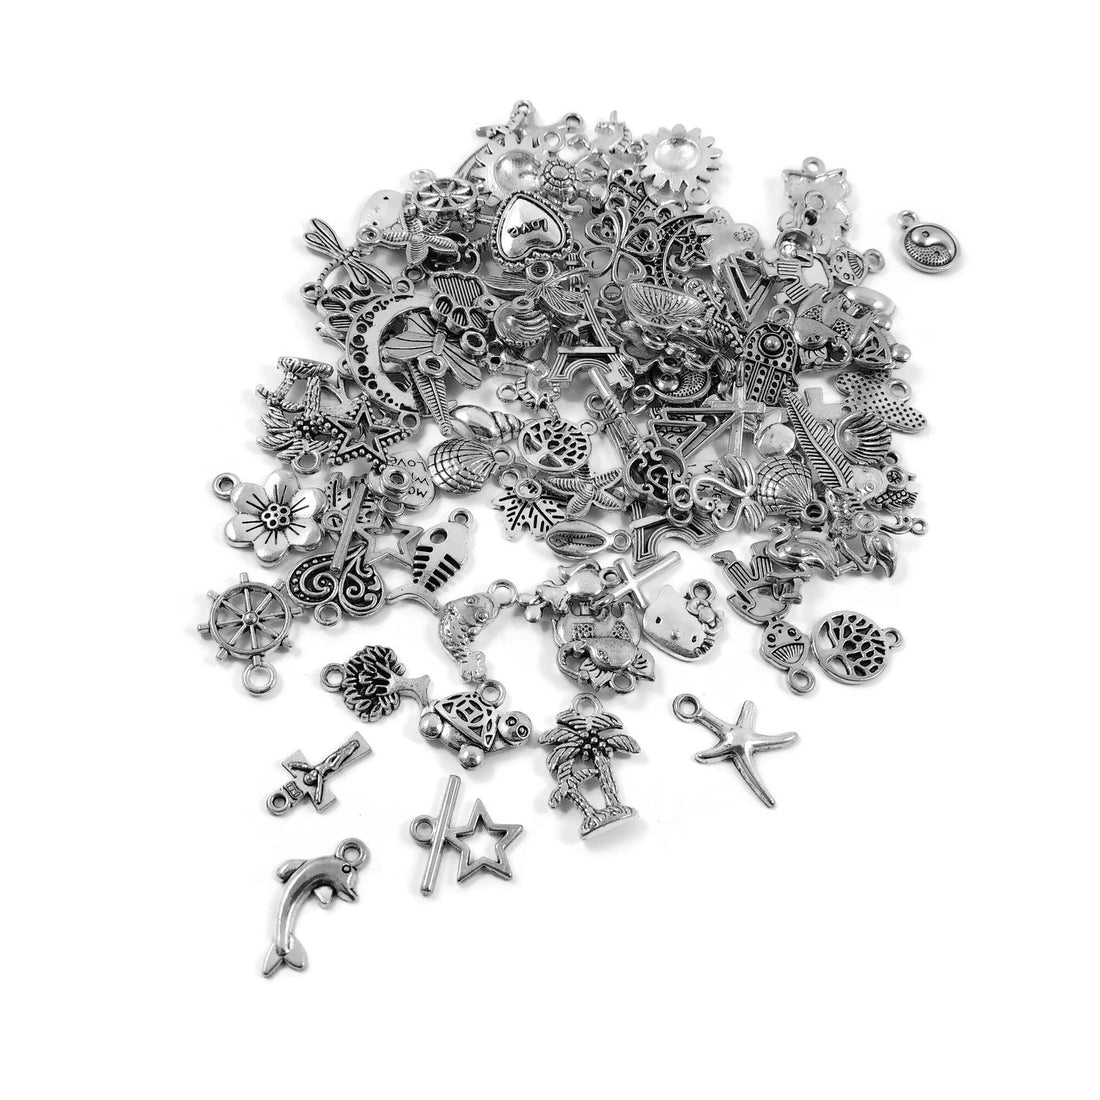 100 assorted bulk charms, Nickel free metal mixed pendants, Silver charm mix grab bag for jewelry making